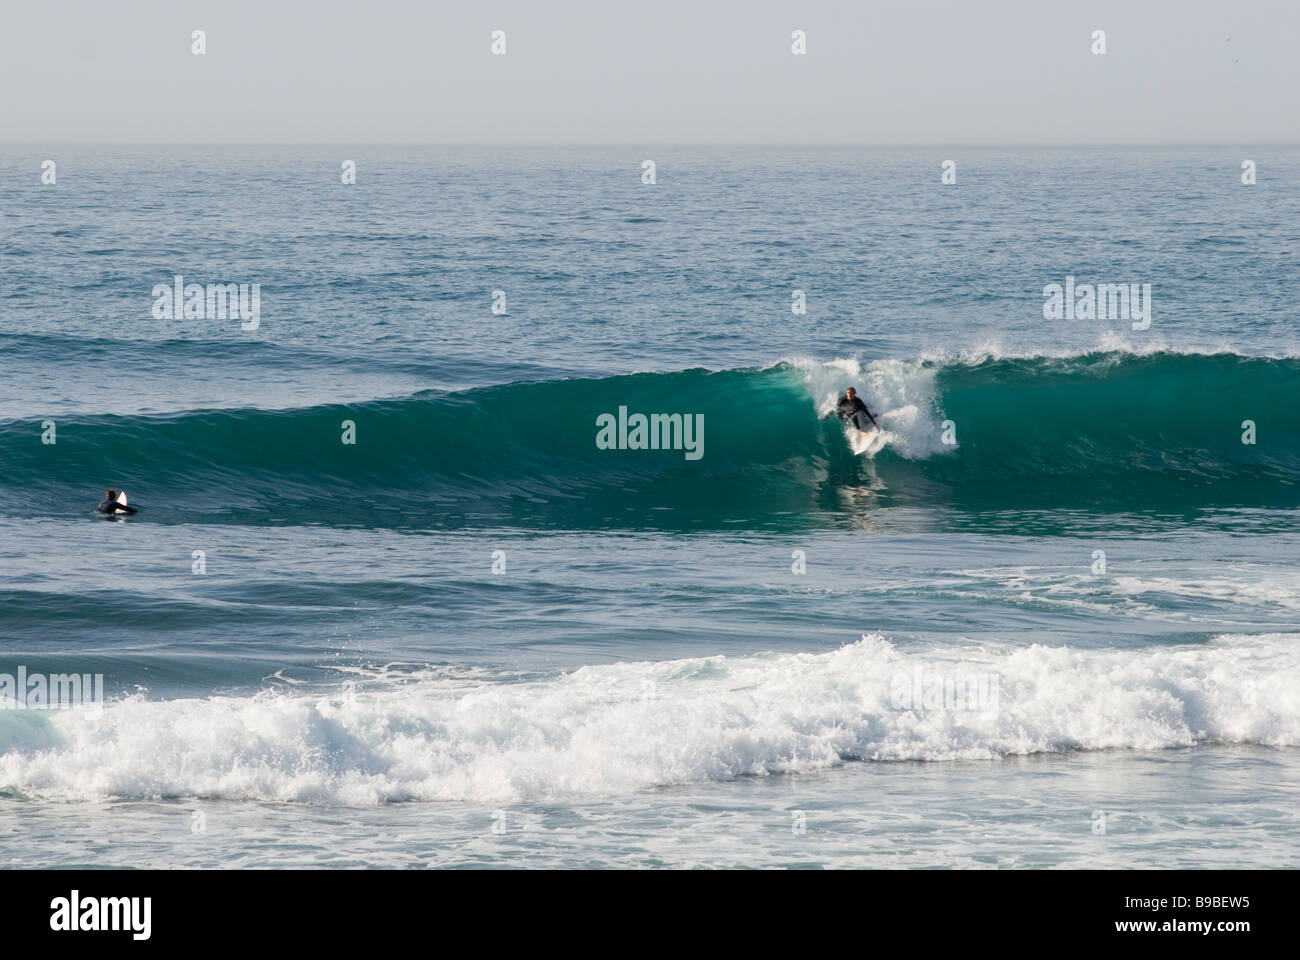 A surfer rides a wave at Cap Rihr on the central Moroccan coast. Stock Photo